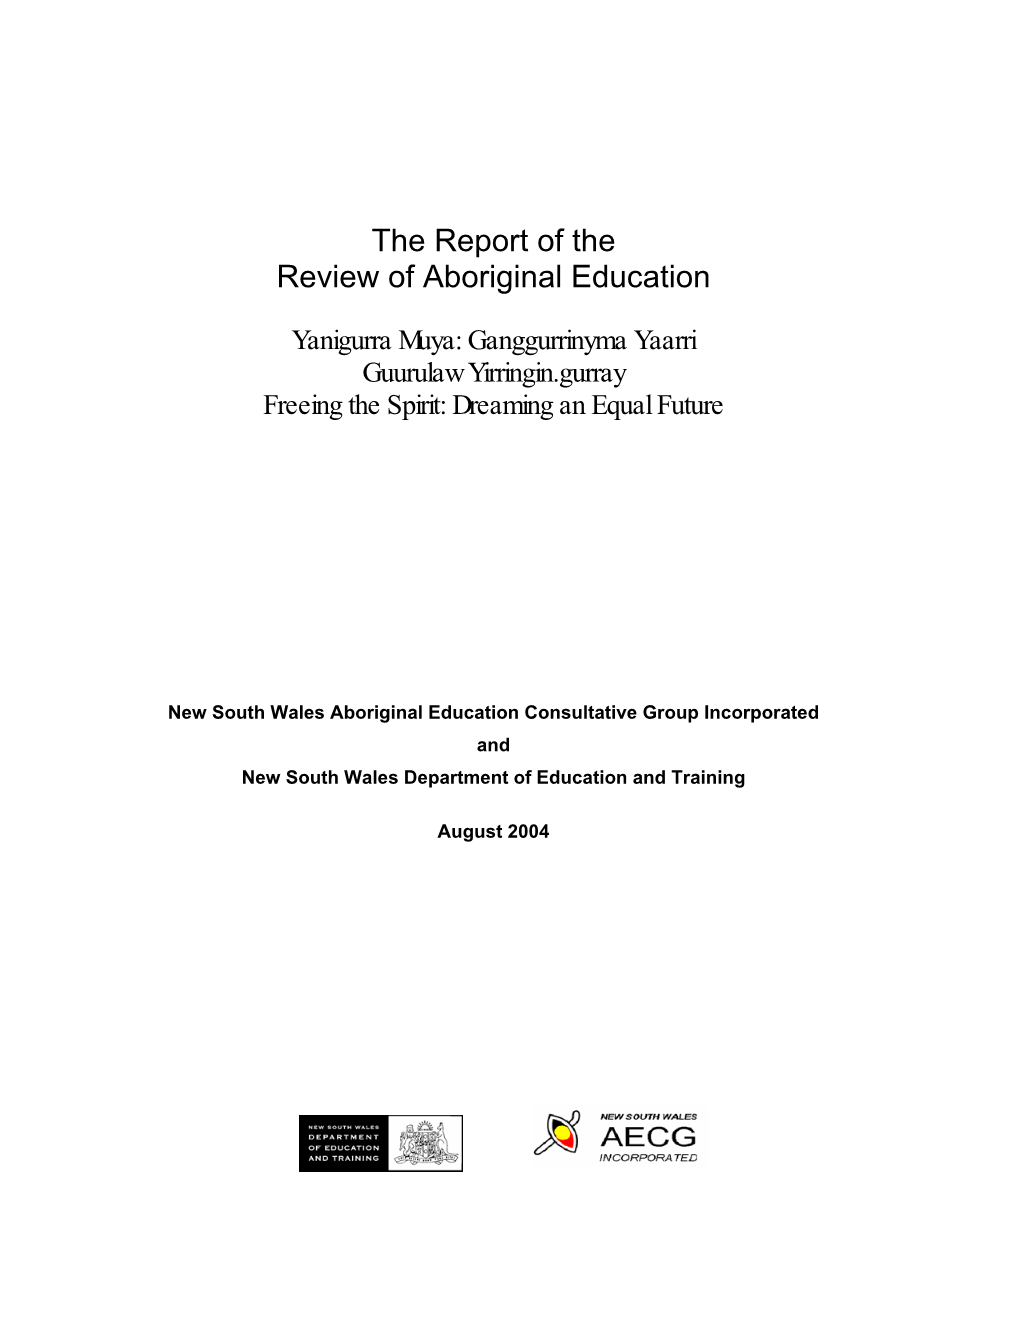 The Report of the Review of Aboriginal Education